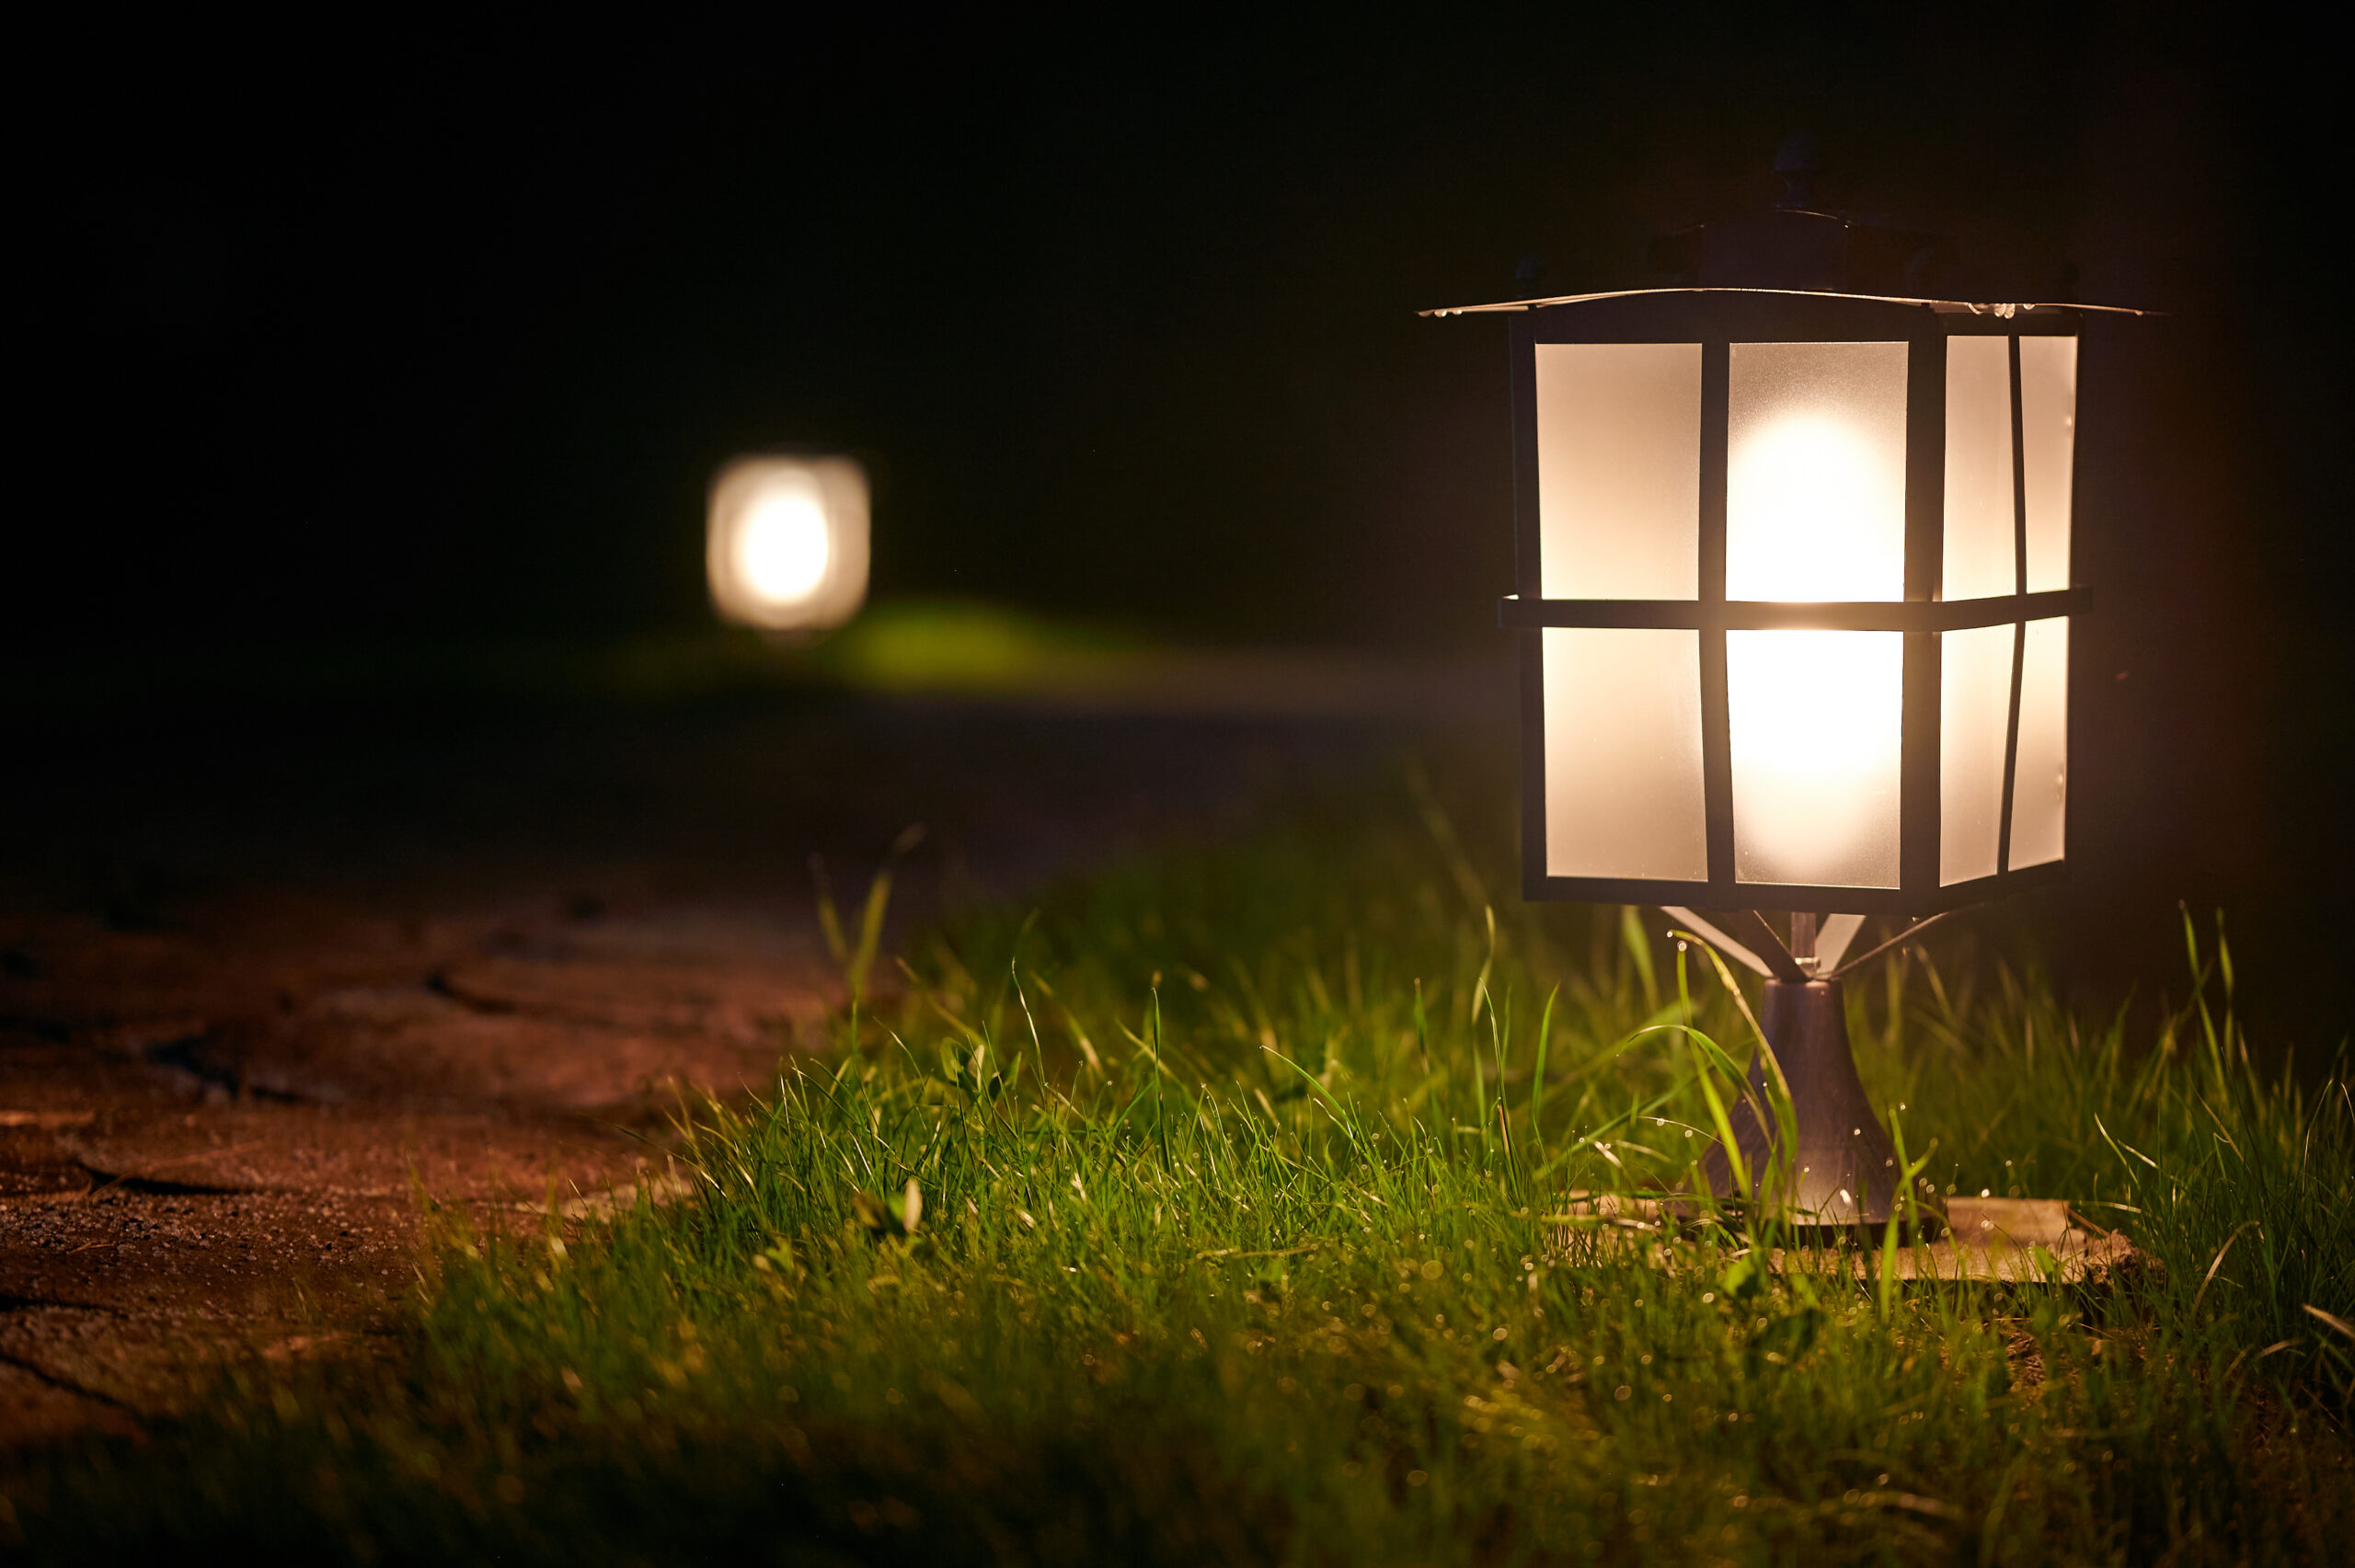 Should you install solar landscape lighting in Stow, MA